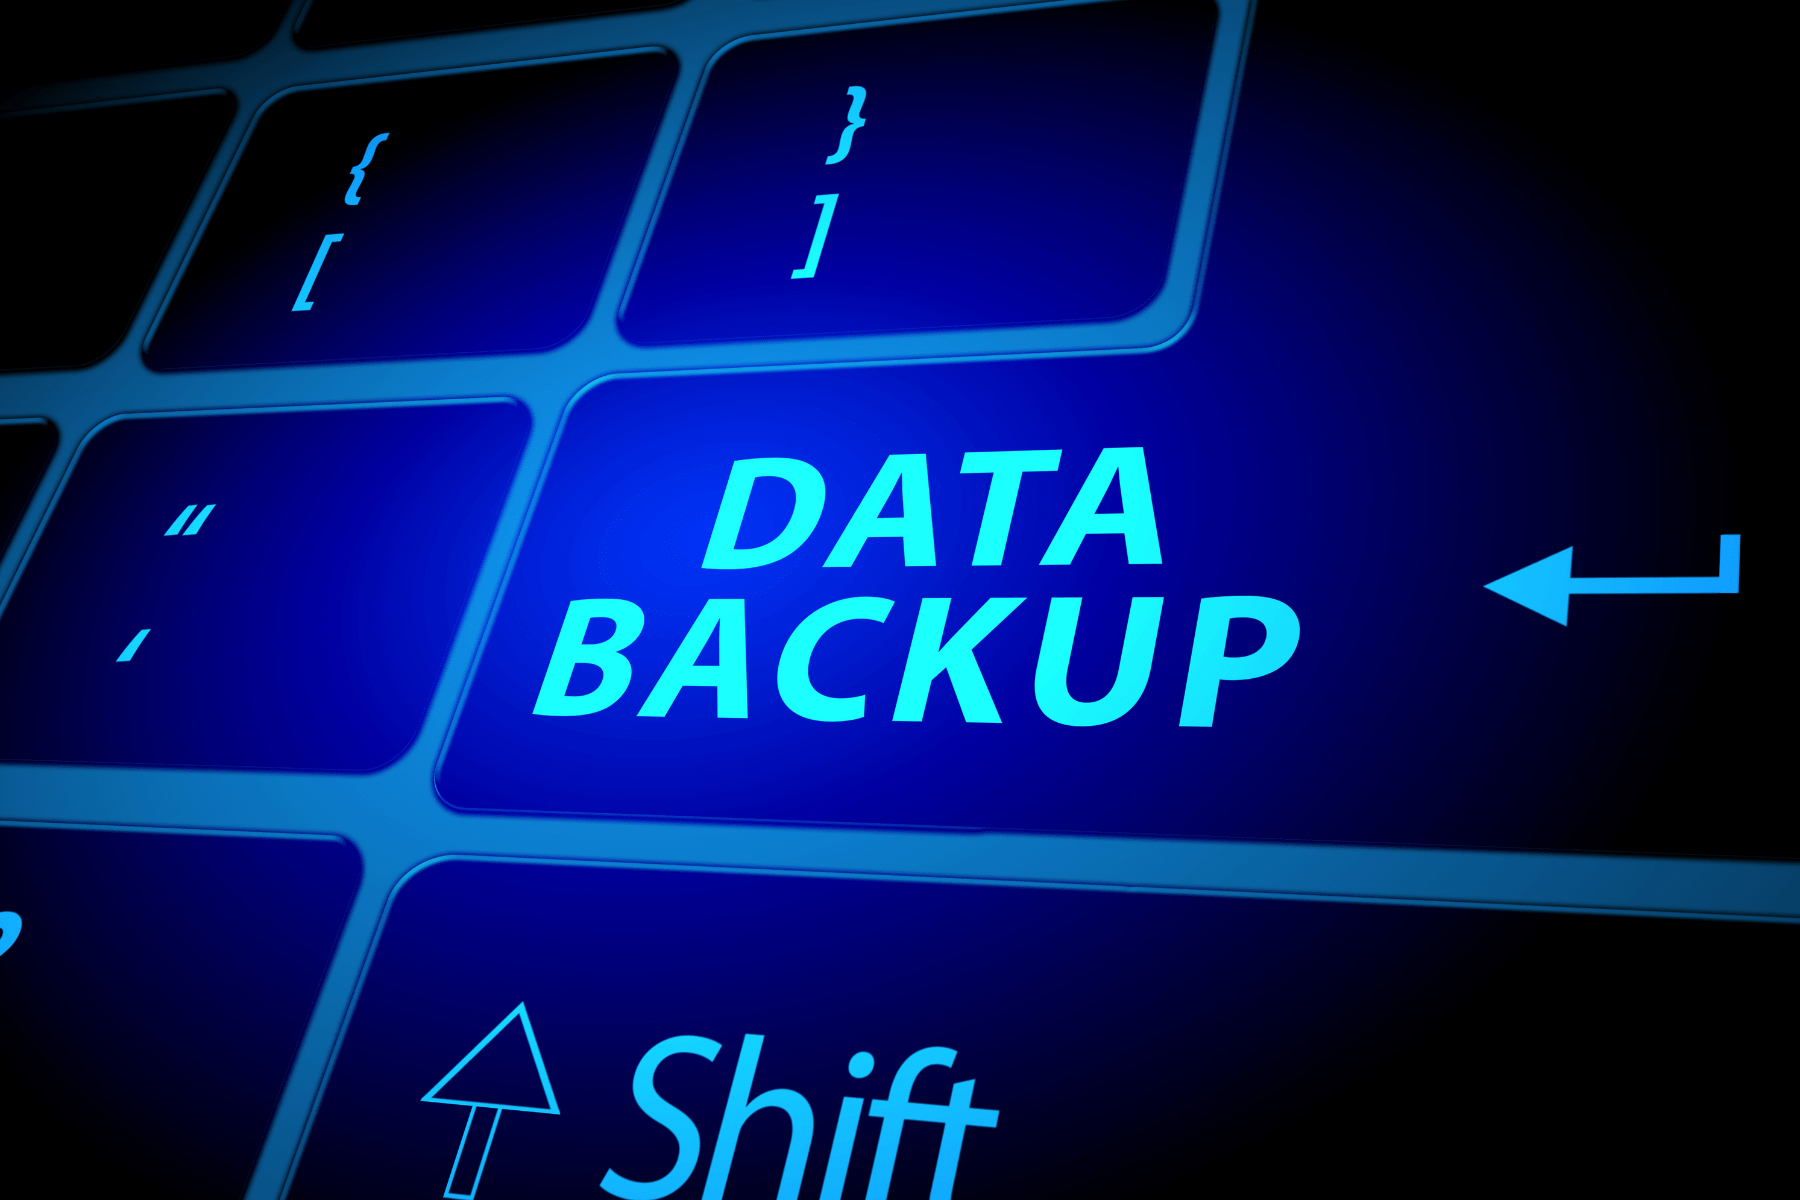 A close-up view of a computer keyboard with a blue-lit key labeled "data backup" highlighted.